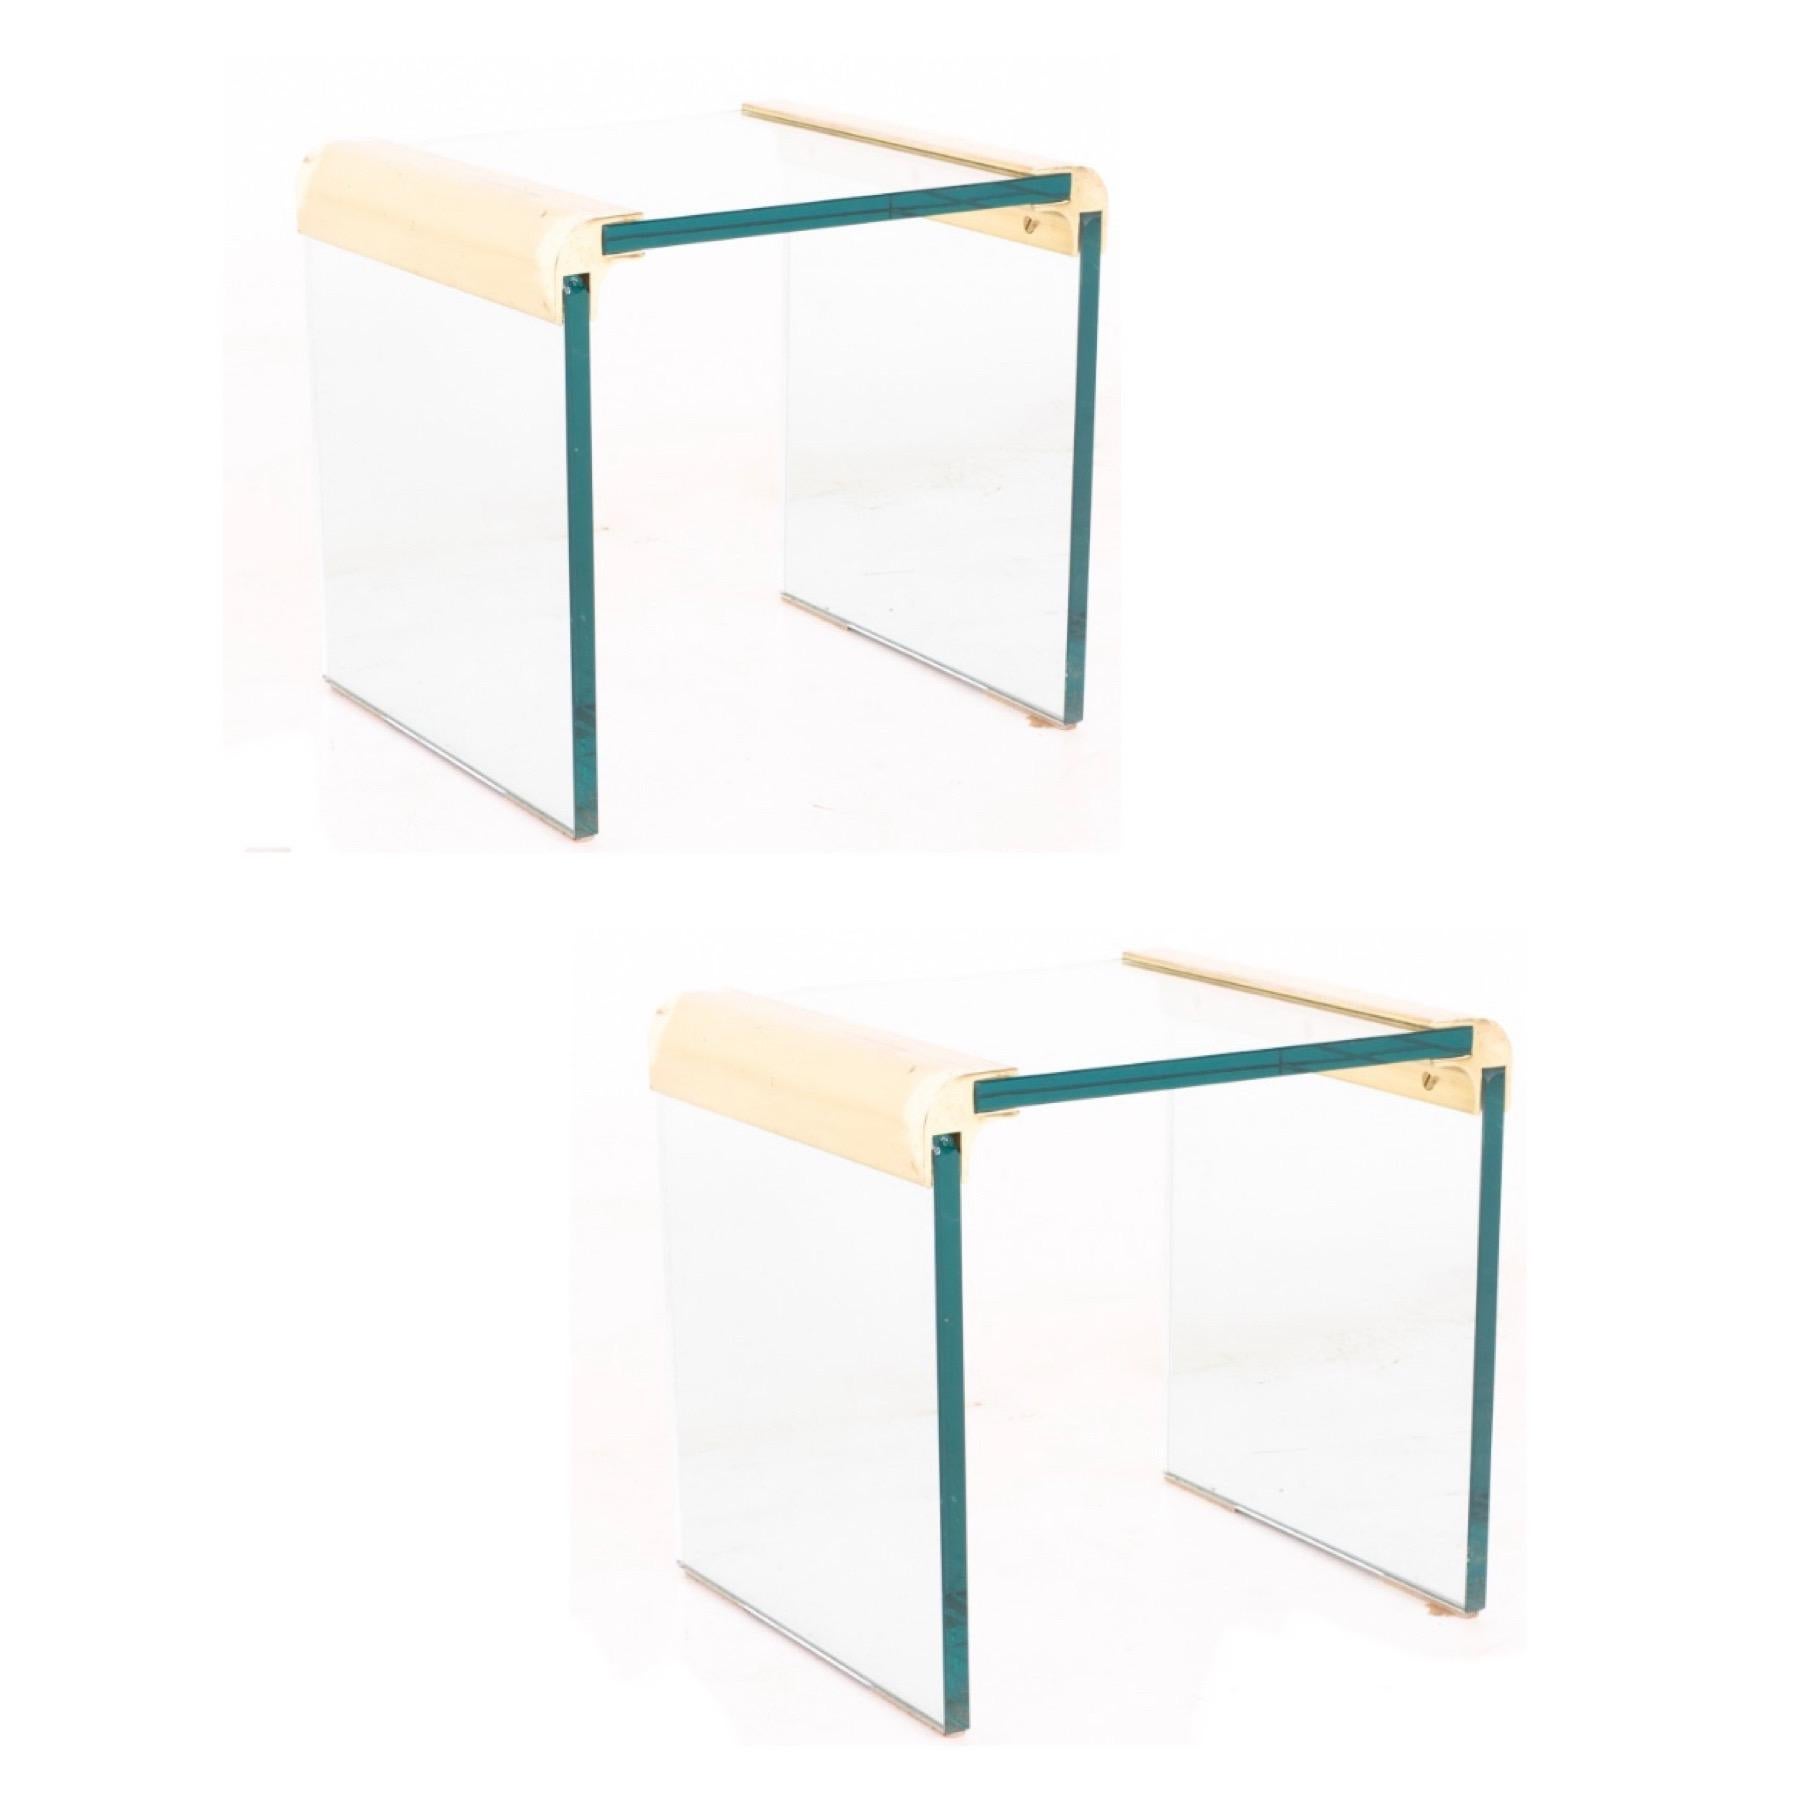 American Modern Brass & Glass Waterfall End Tables by Leon Rosen for Pace Collection